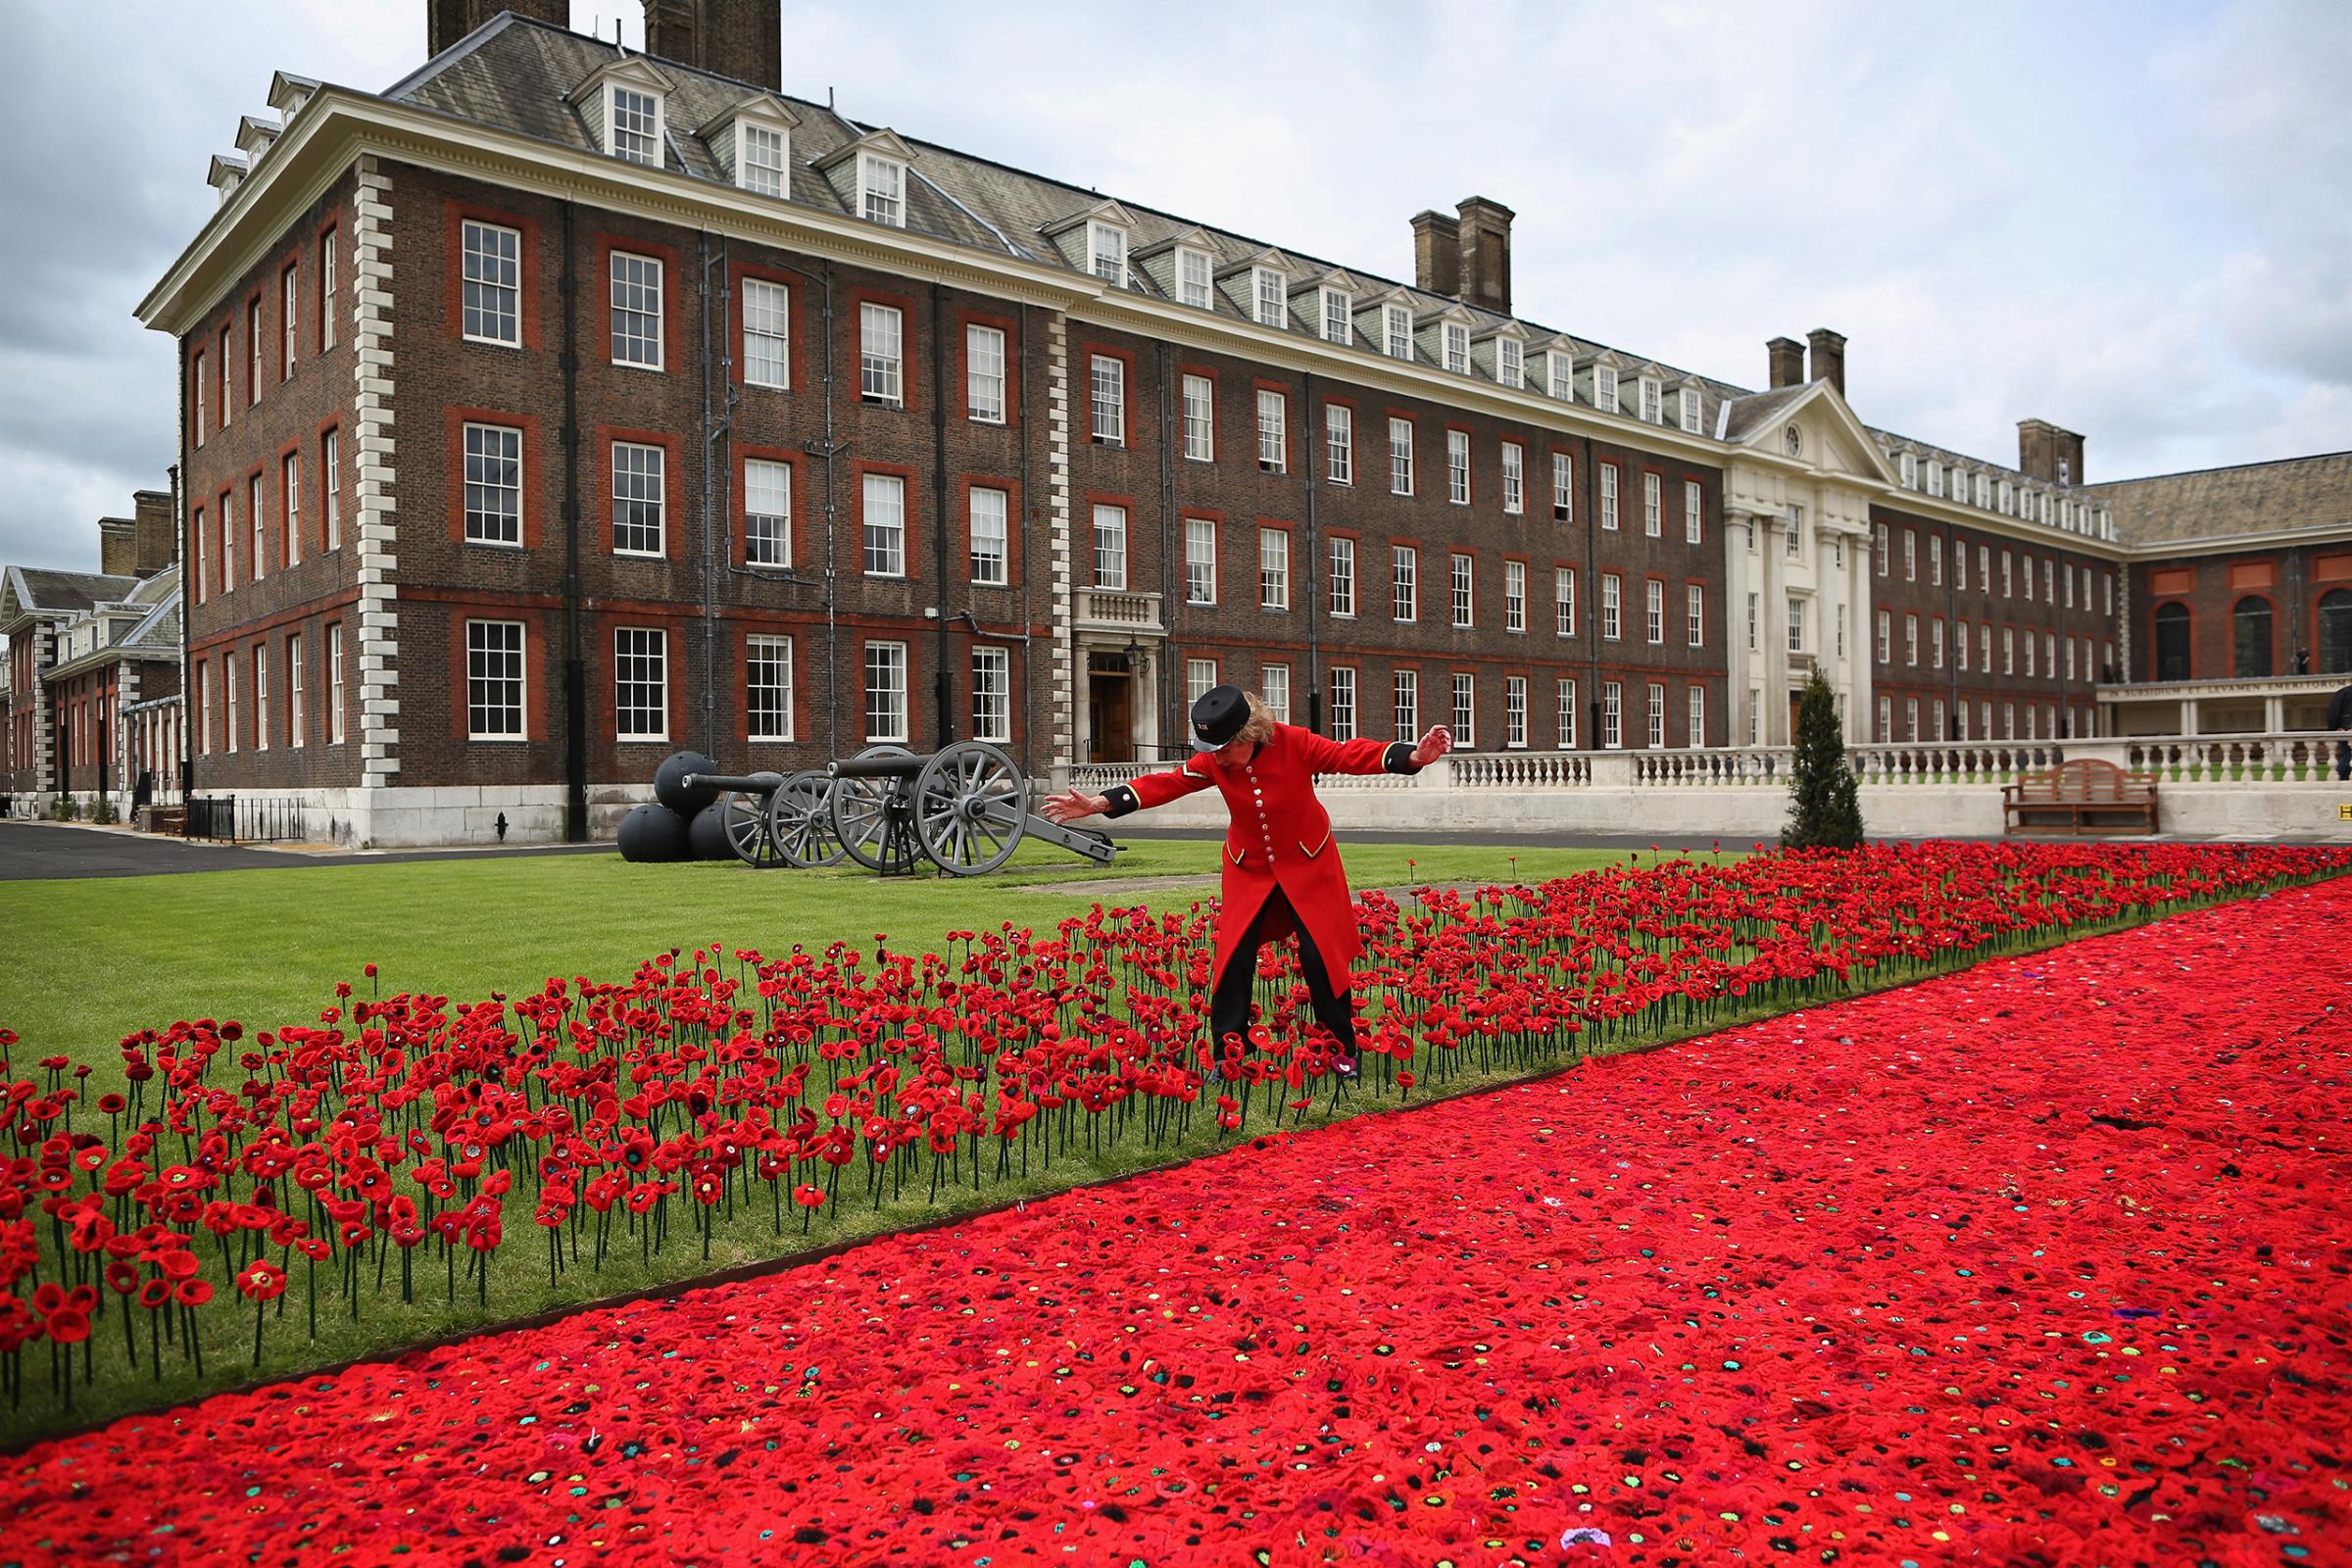 Chelsea Flower Show Displays 300000 Knitted Poppies To Honour The War Dead